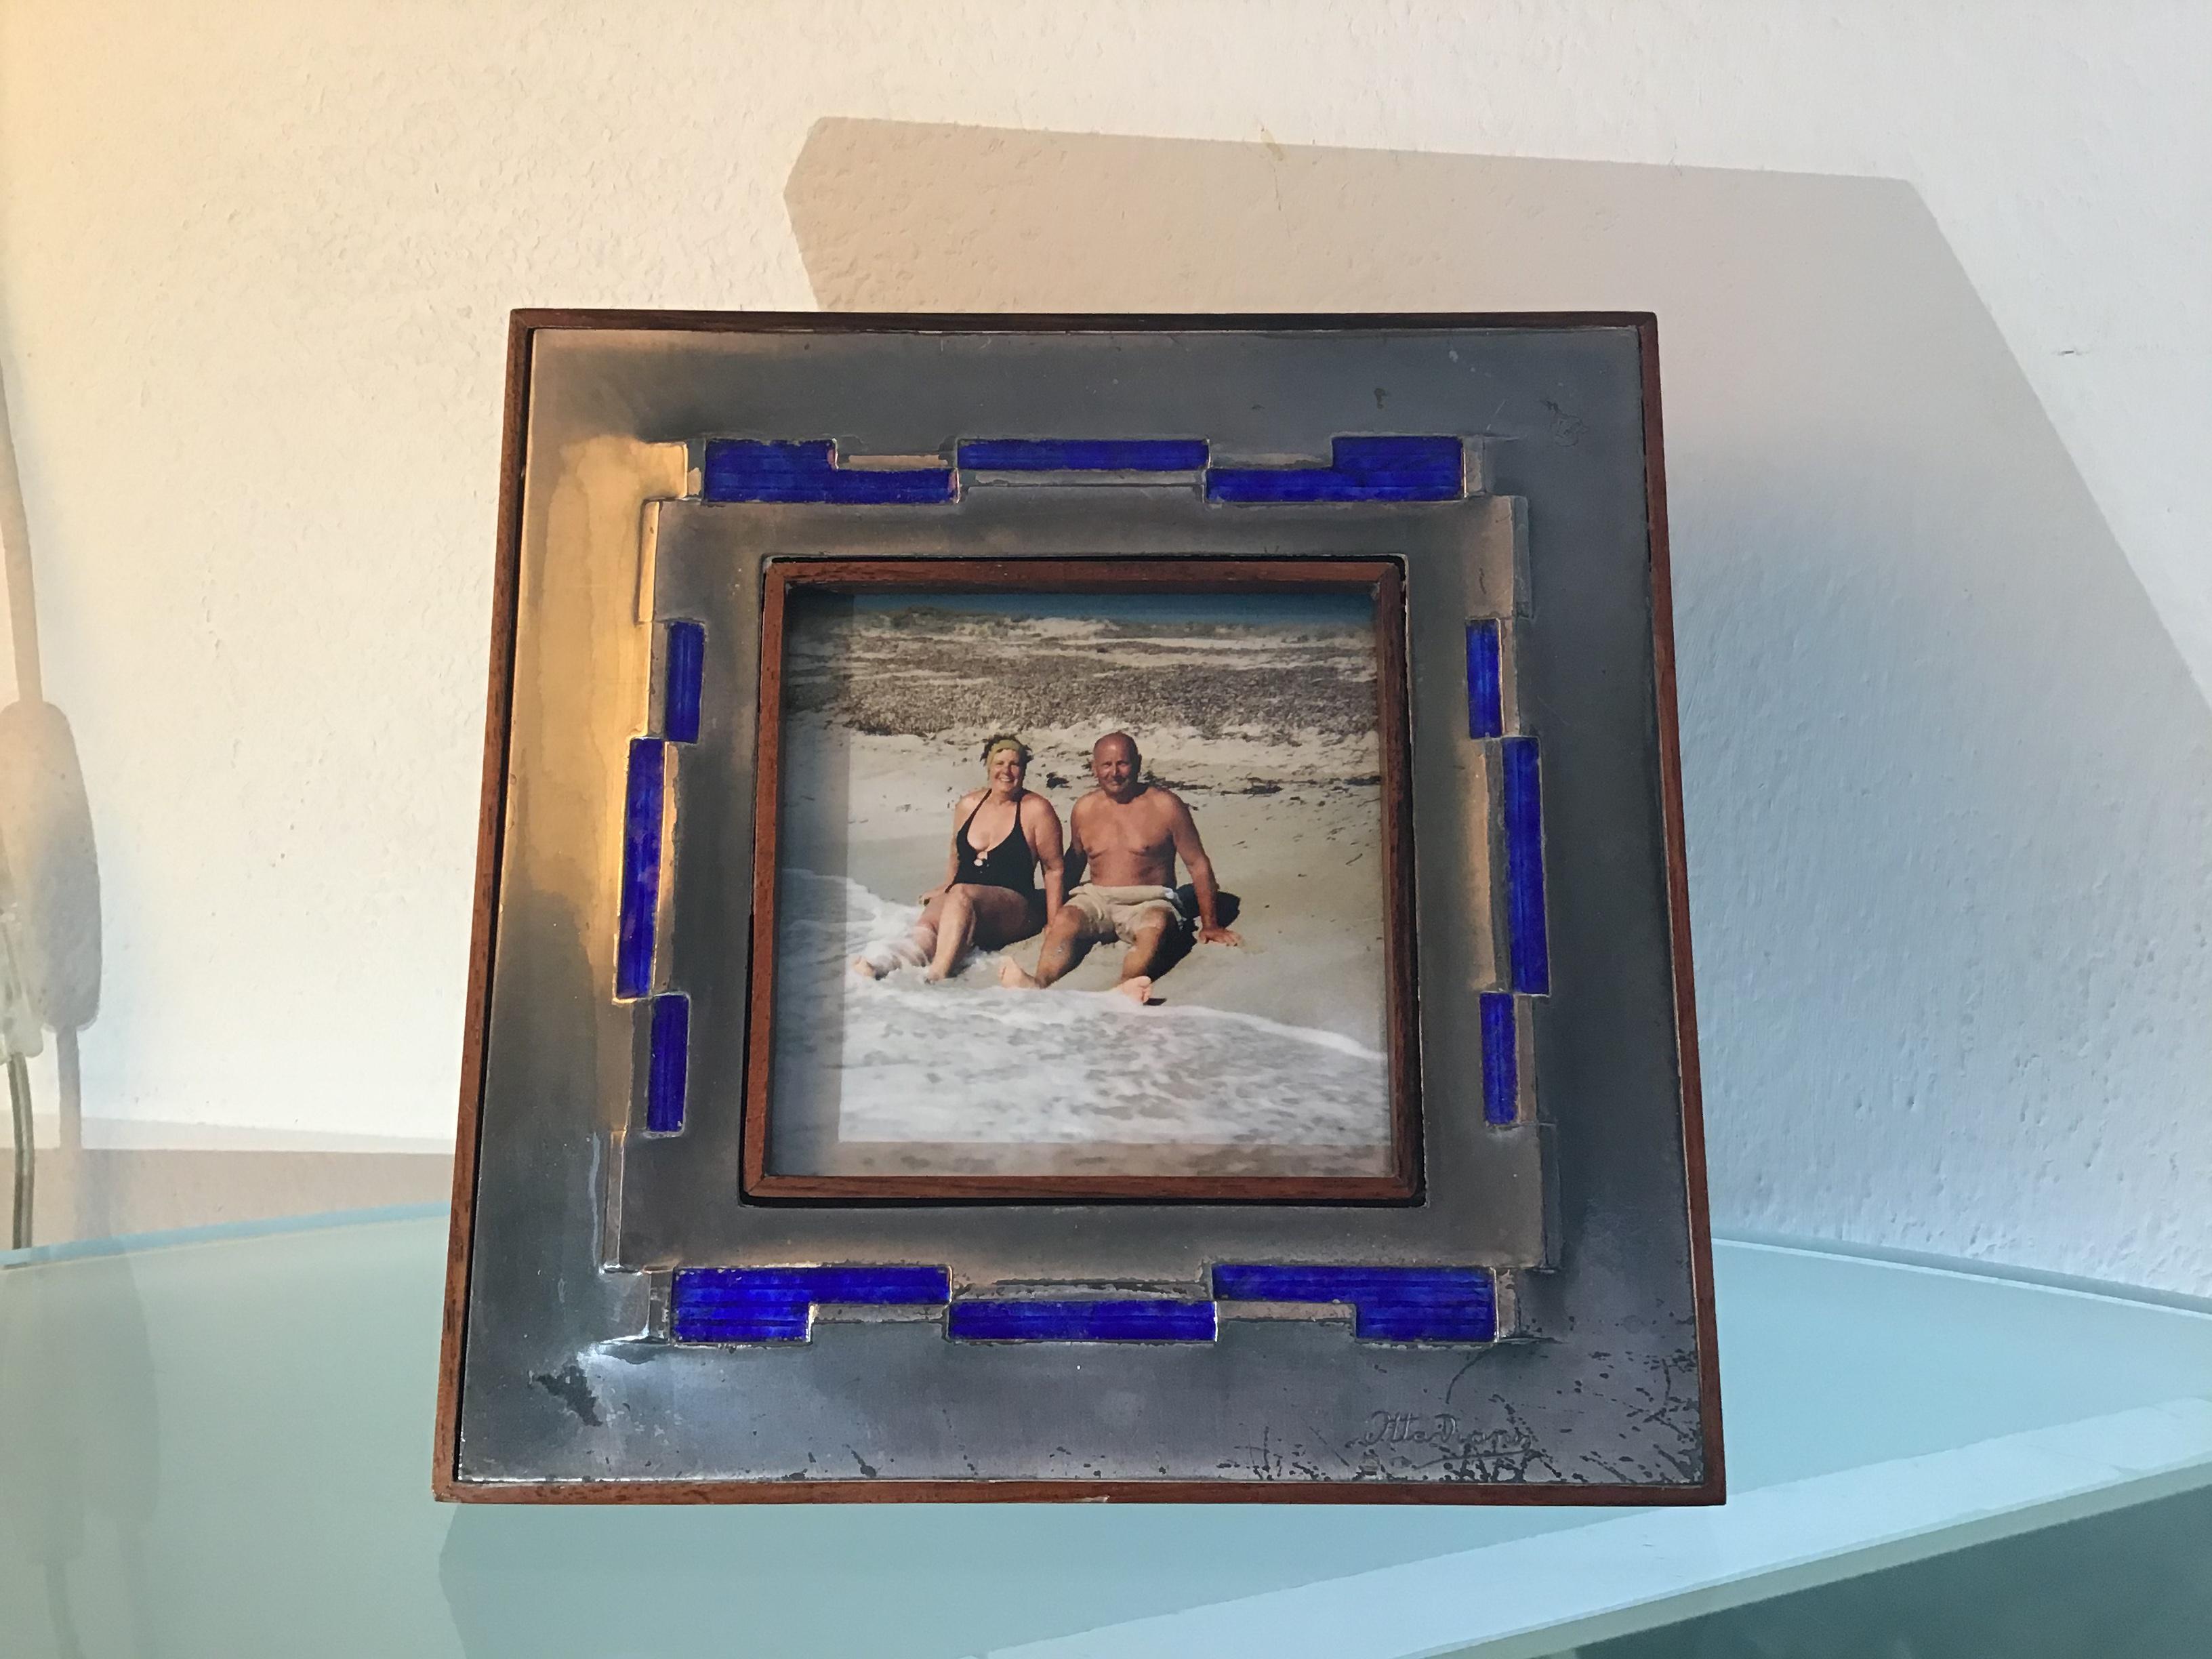 Ottaviani Pucture Frame 925 Silver Enamelled Copper Wood 1960 Italy For Sale 3